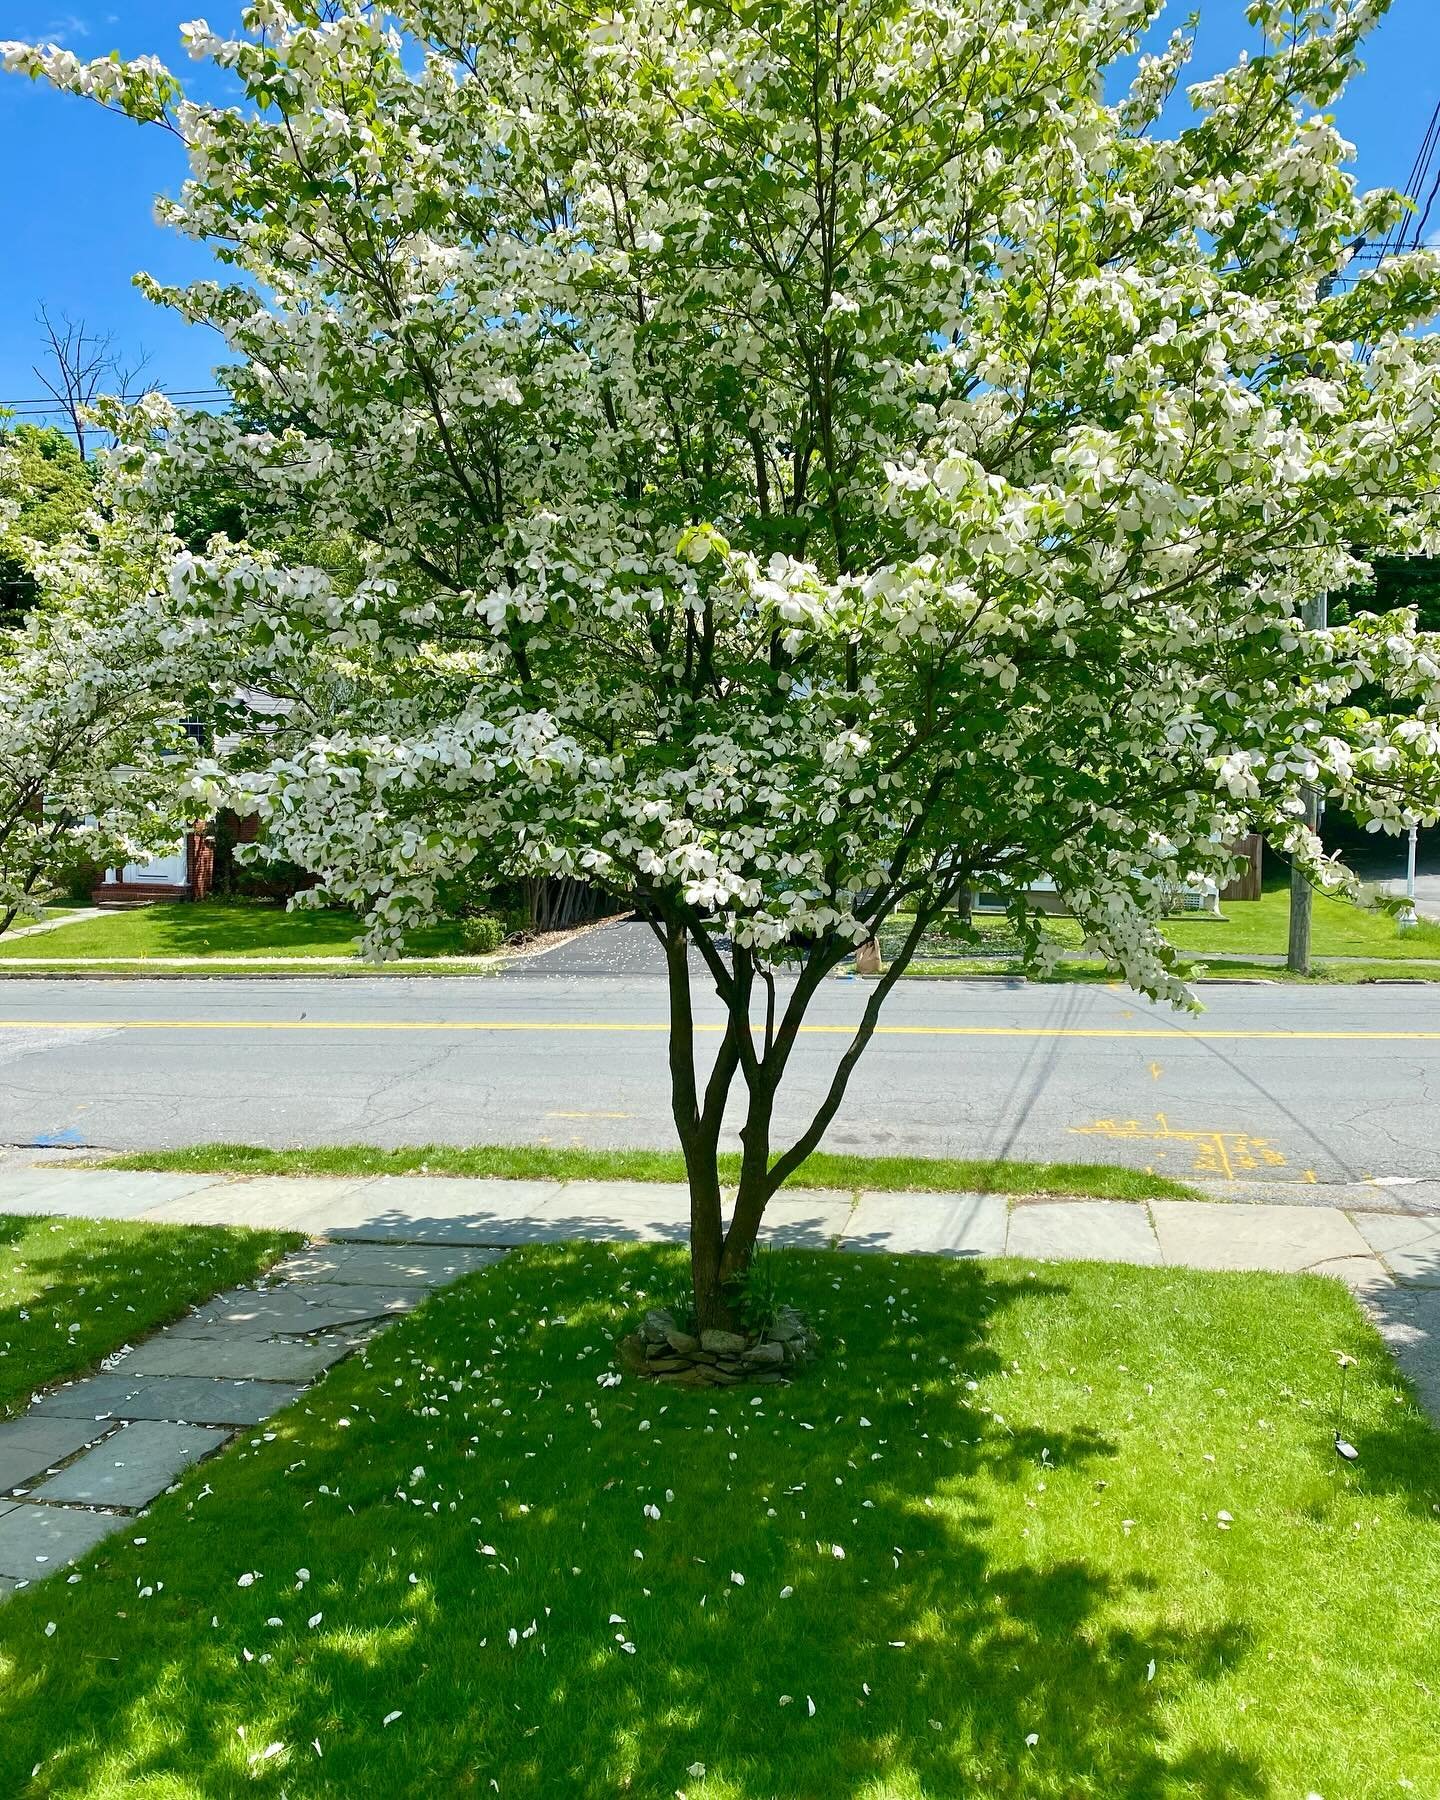 It&rsquo;s been hard to think what to write after the loss of someone so dear. I so wanted mom to see the dogwood tree in bloom. It only lasts a few weeks. Today all the petals blanketed the grass. I pray the grief goes away as quickly. Everyday we a